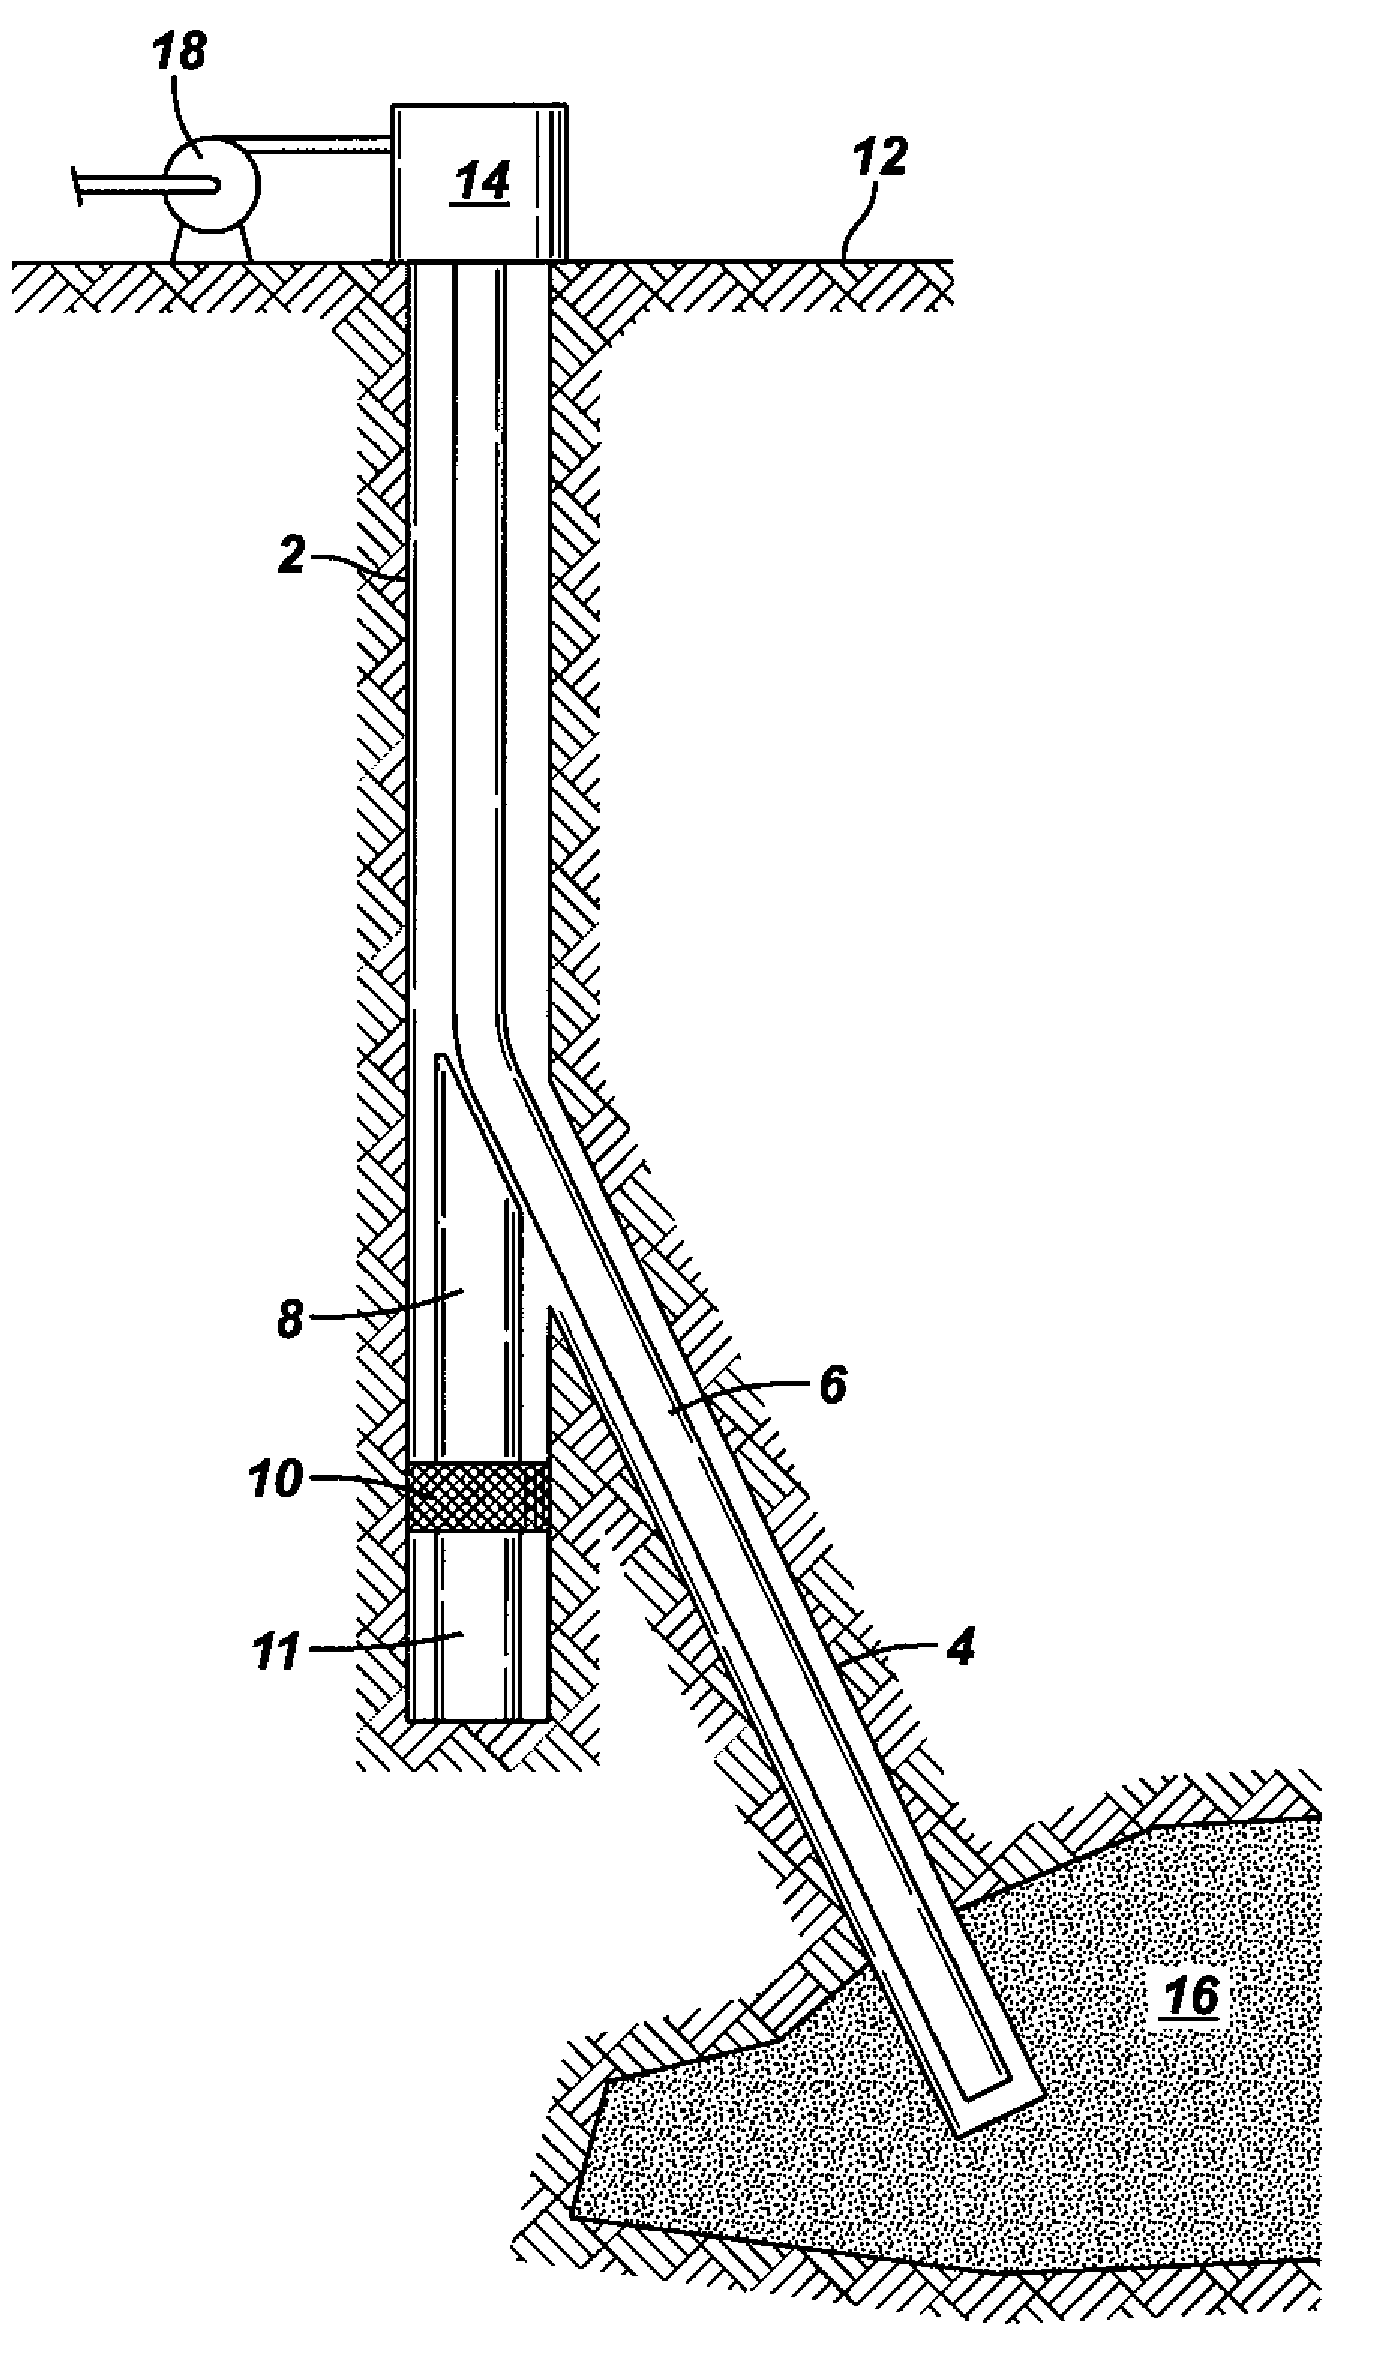 Degradable whipstock apparatus and method of use